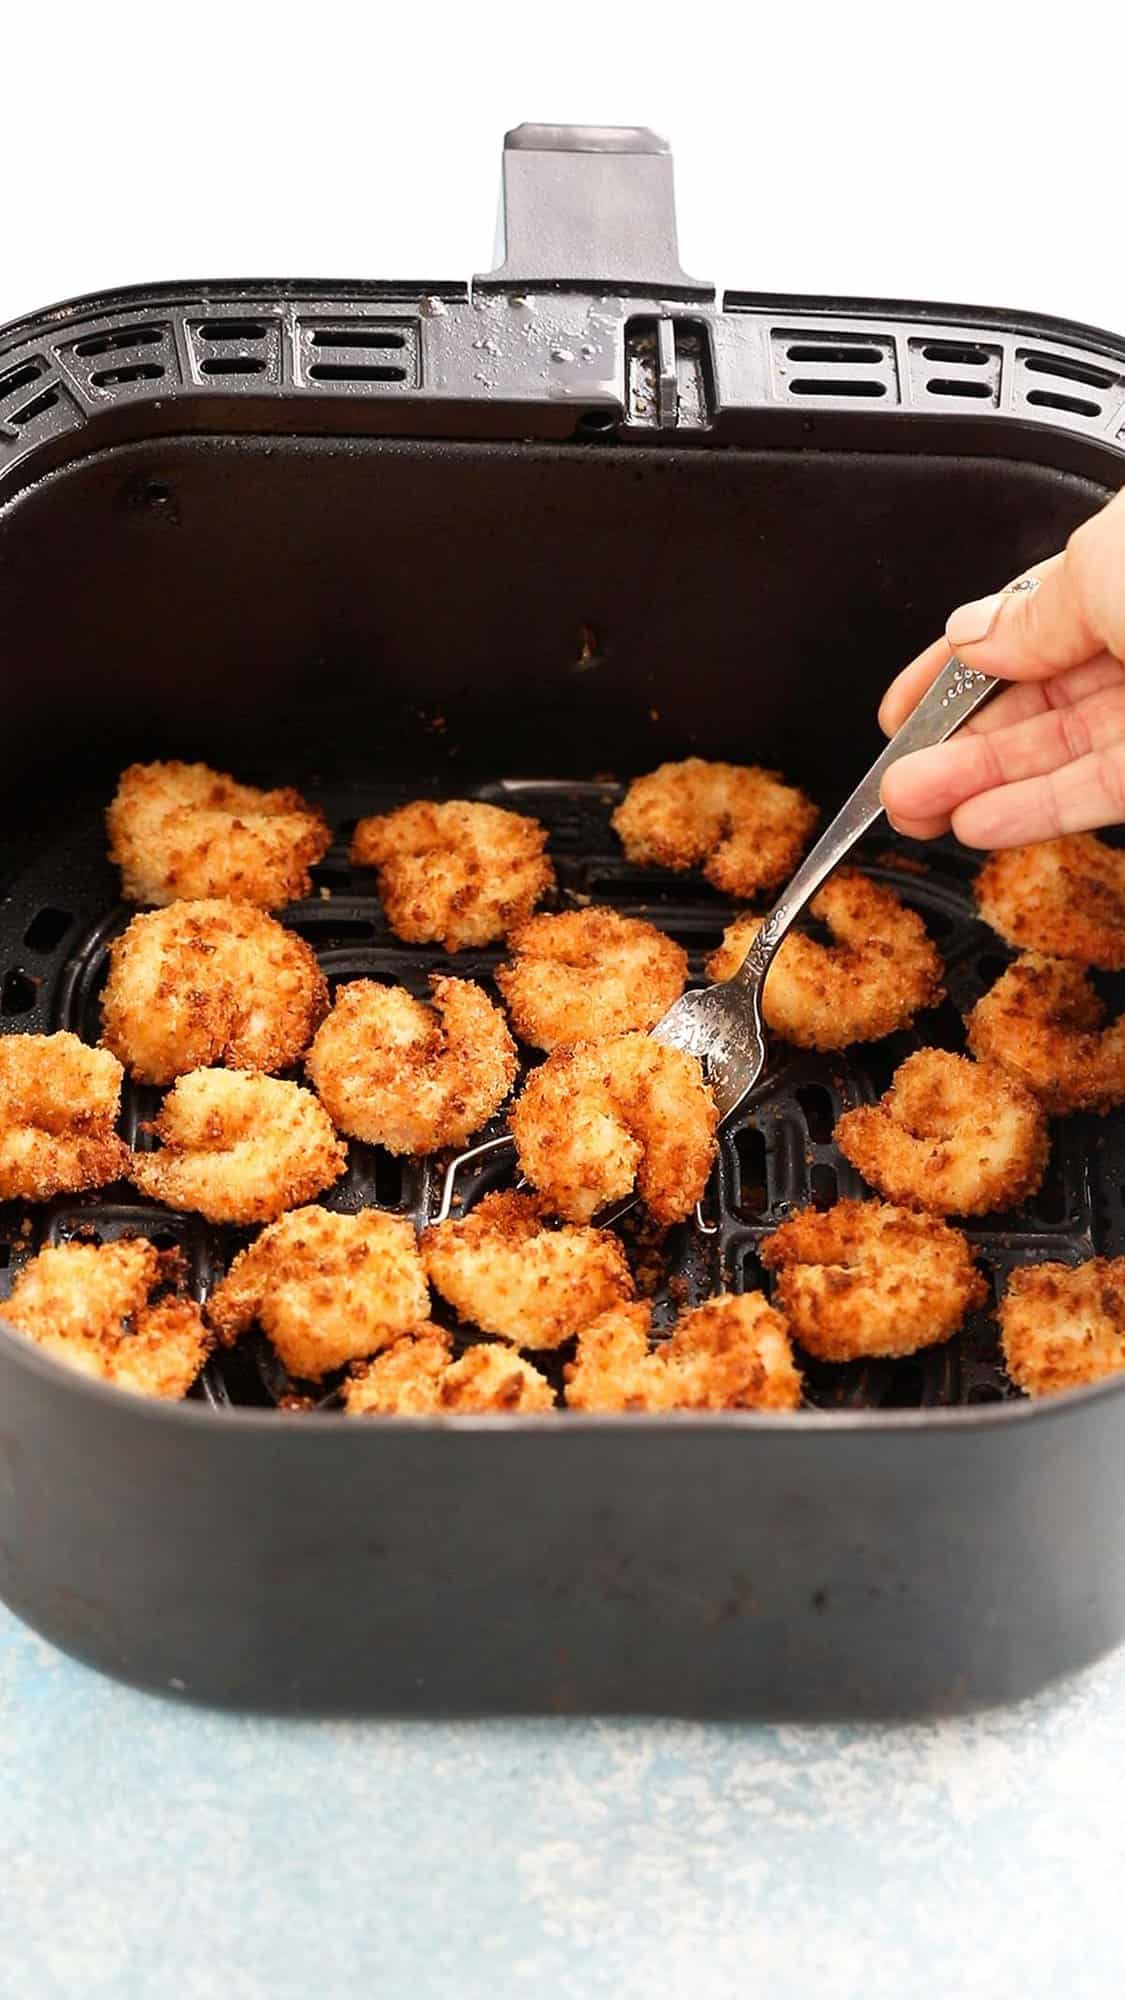 a hand lifting one breaded shrimp from an air fryer basket using a fork.